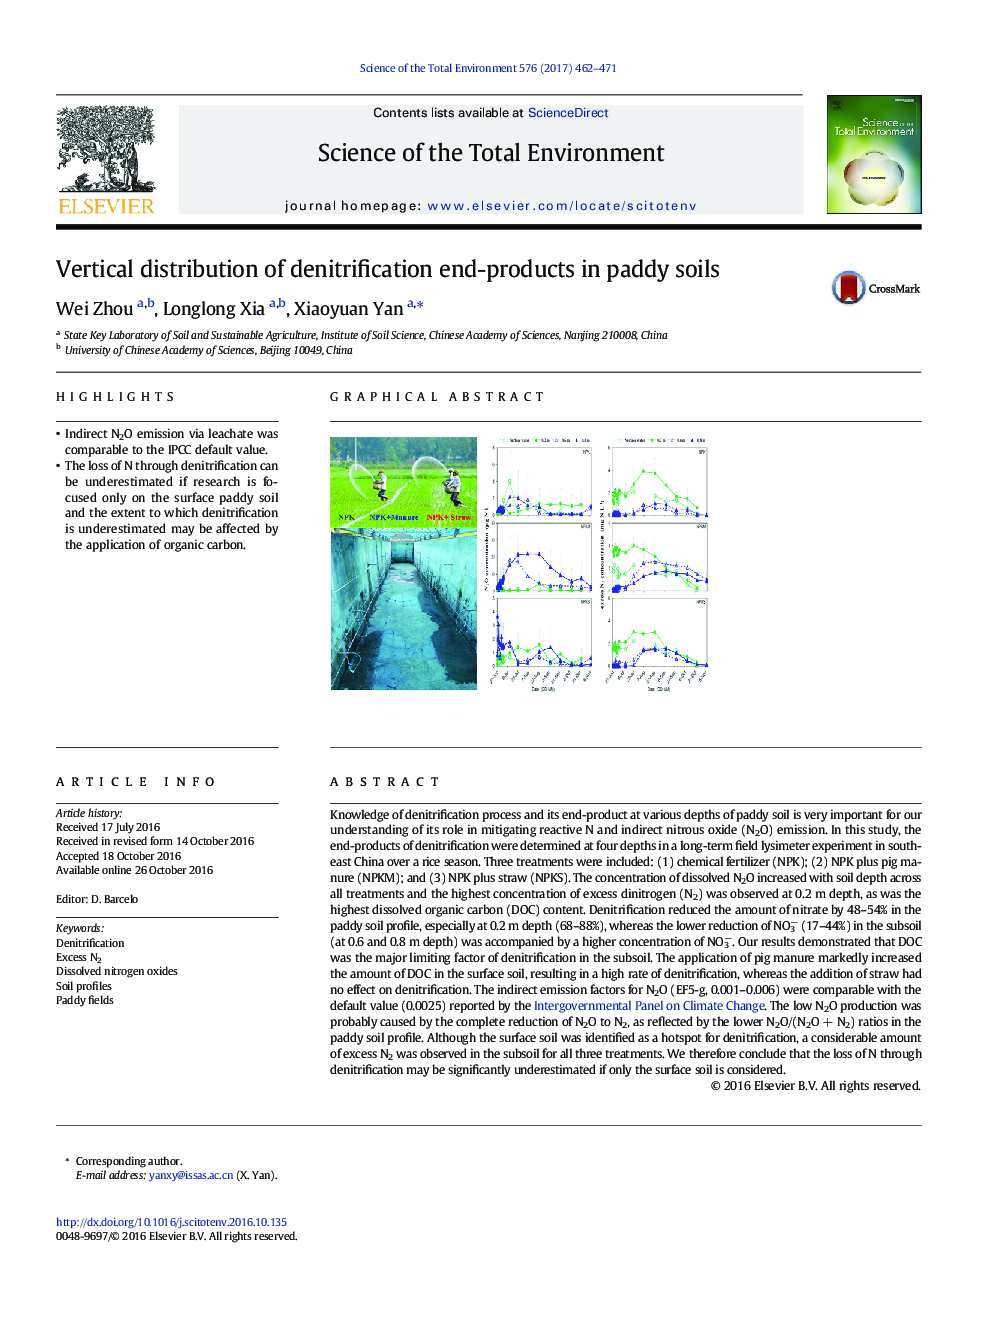 Vertical distribution of denitrification end-products in paddy soils